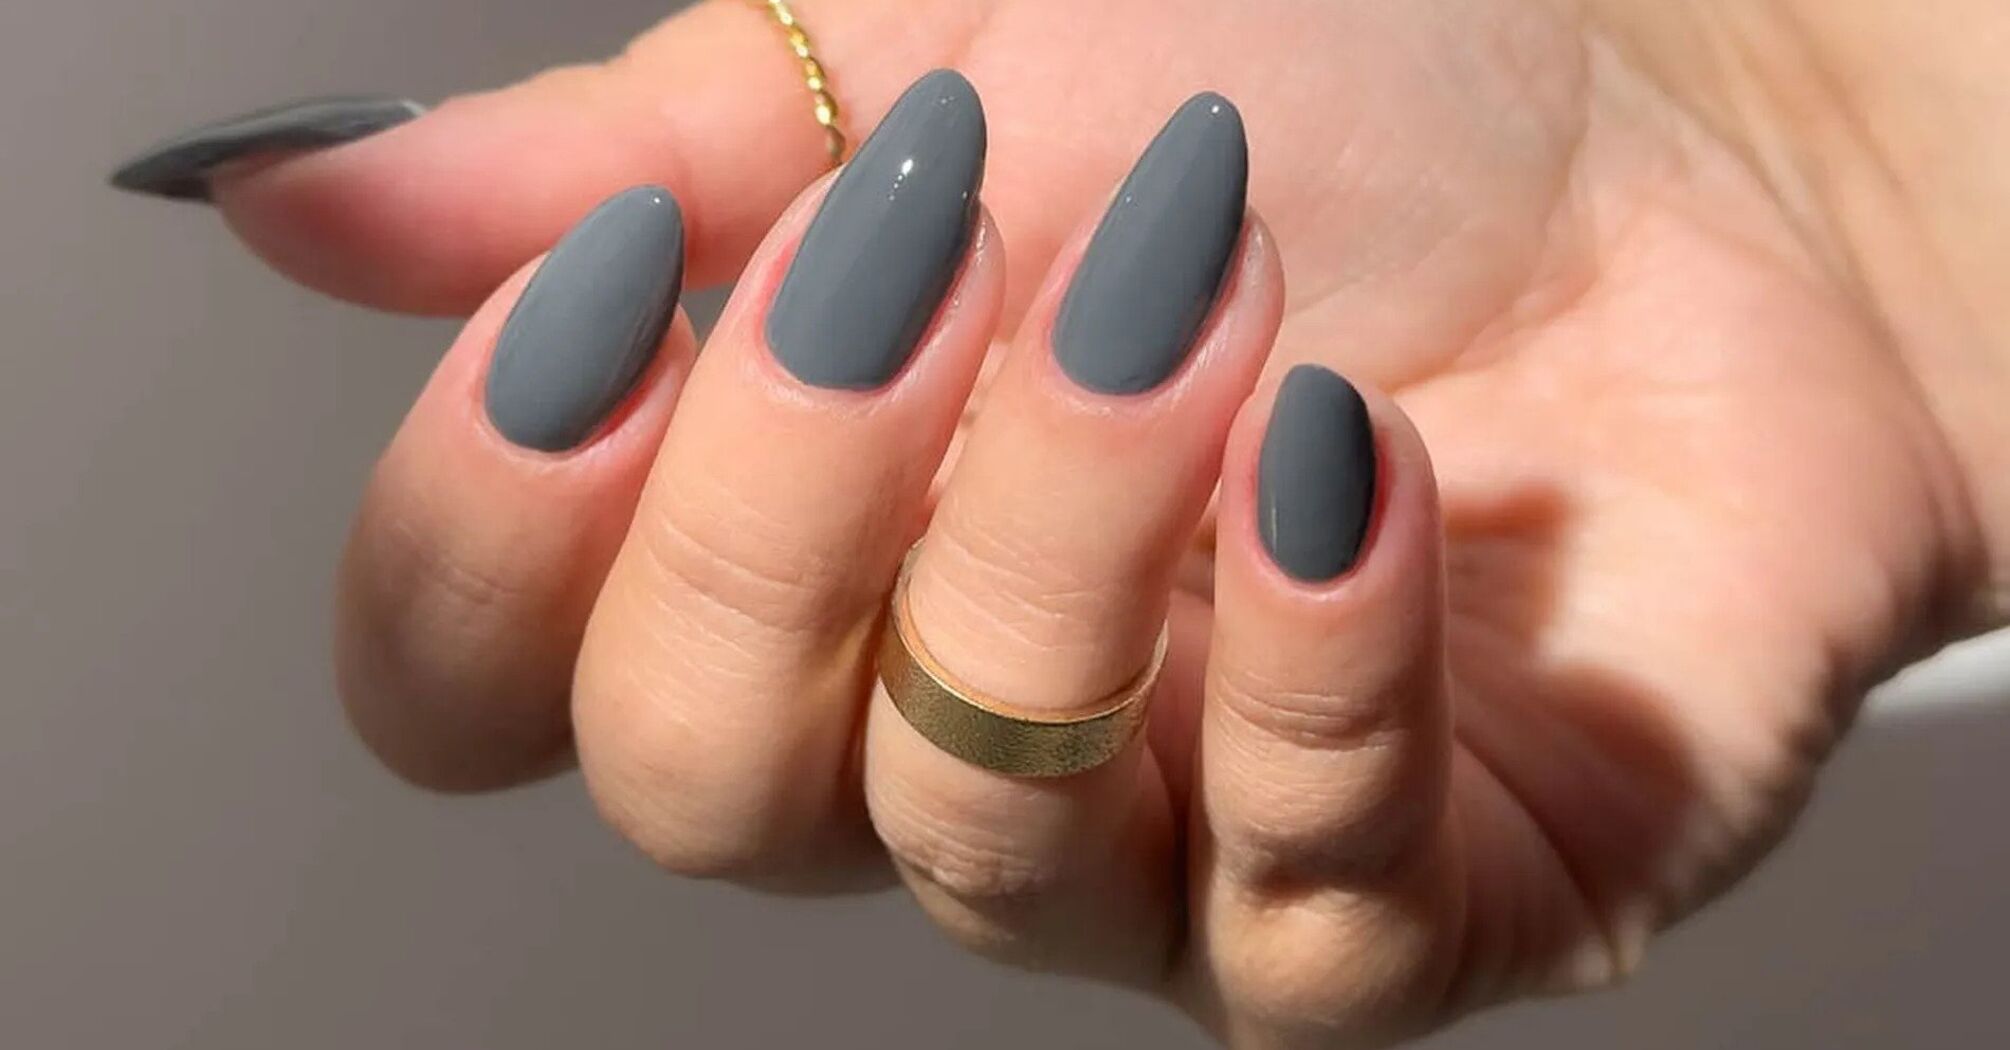 The most versatile nail shape that's trending this spring